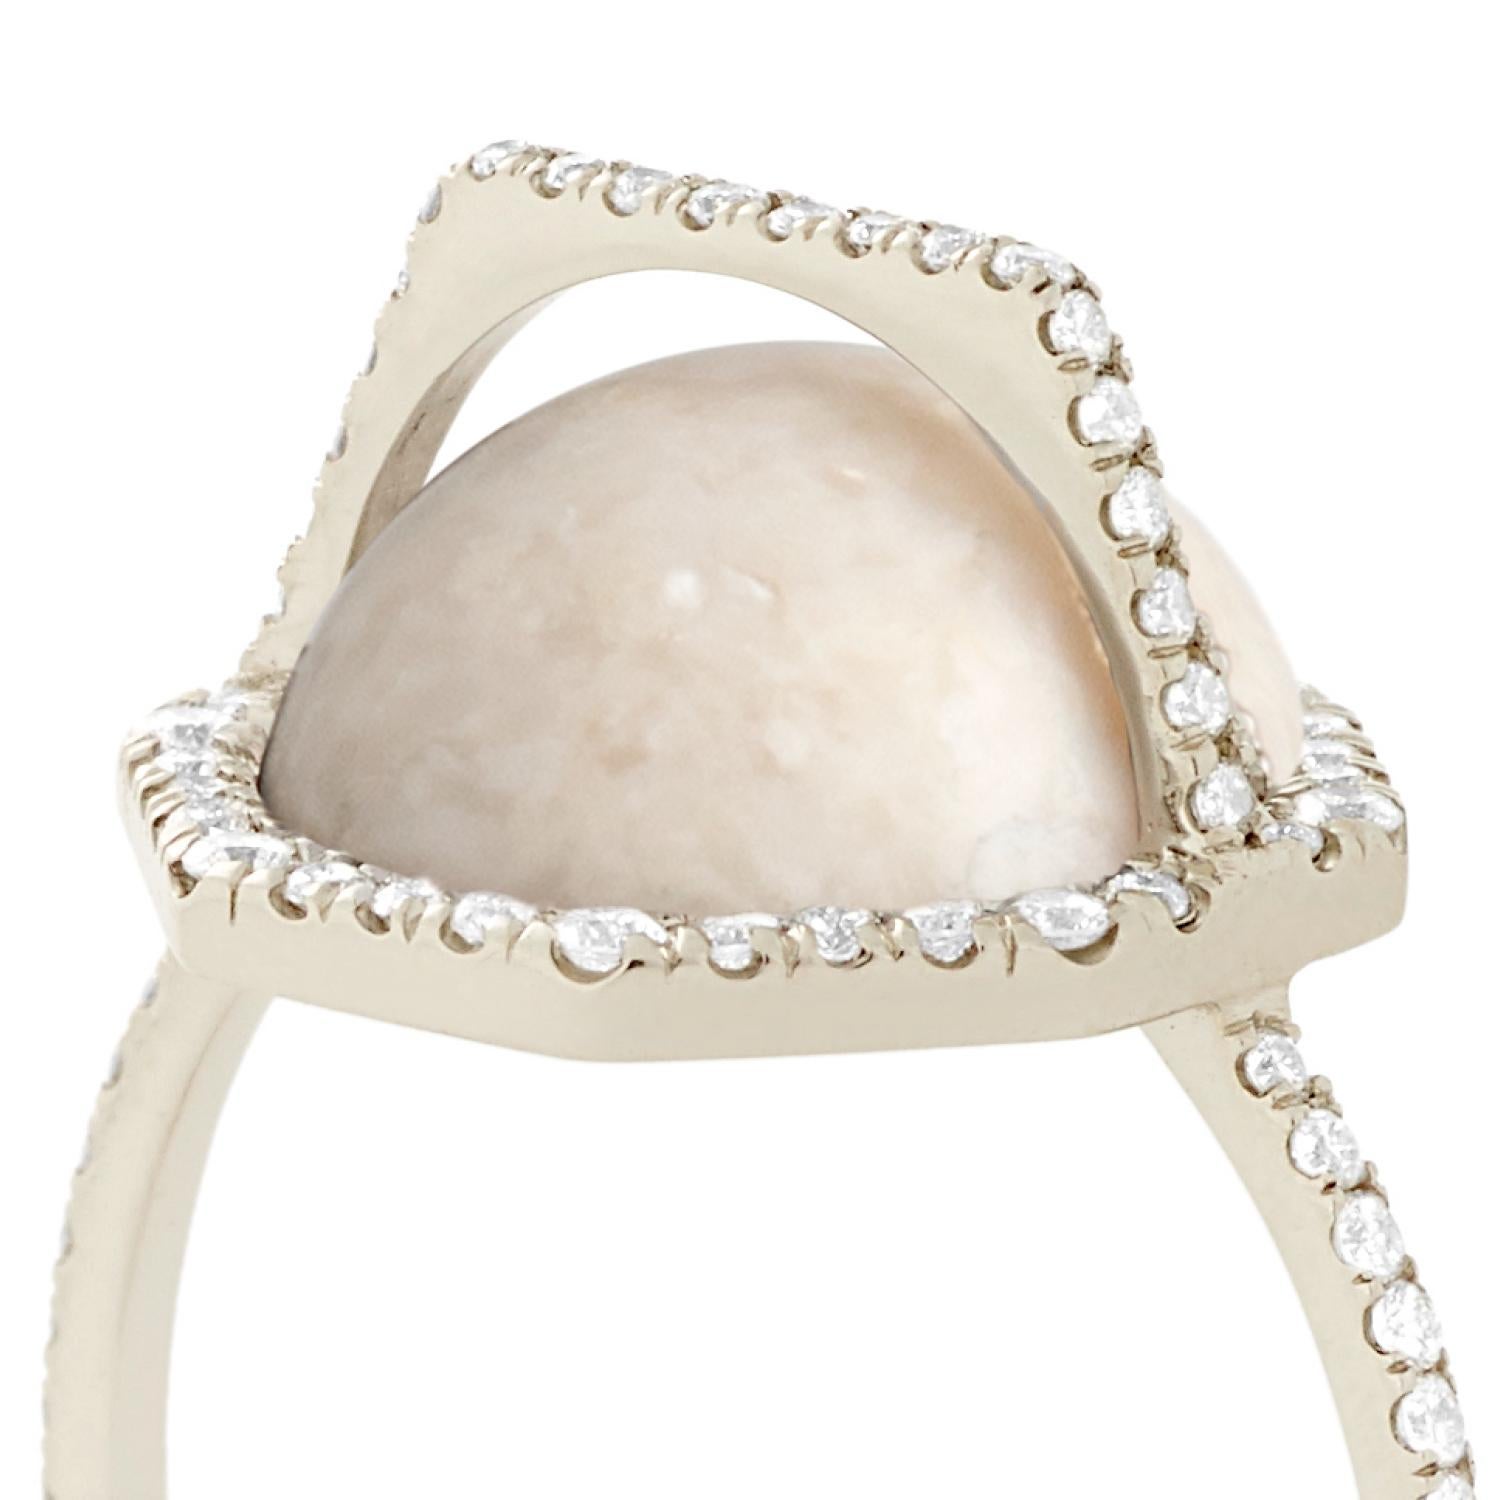 Cream fossilized dinosaur bone arch ring with white diamond pavé, 18 carat recycled white gold, 0.45 TCW 

The cream hues of this specimen of fossilized dinosaur bone are accented by  white diamond pavé that traces the outline of this ring and